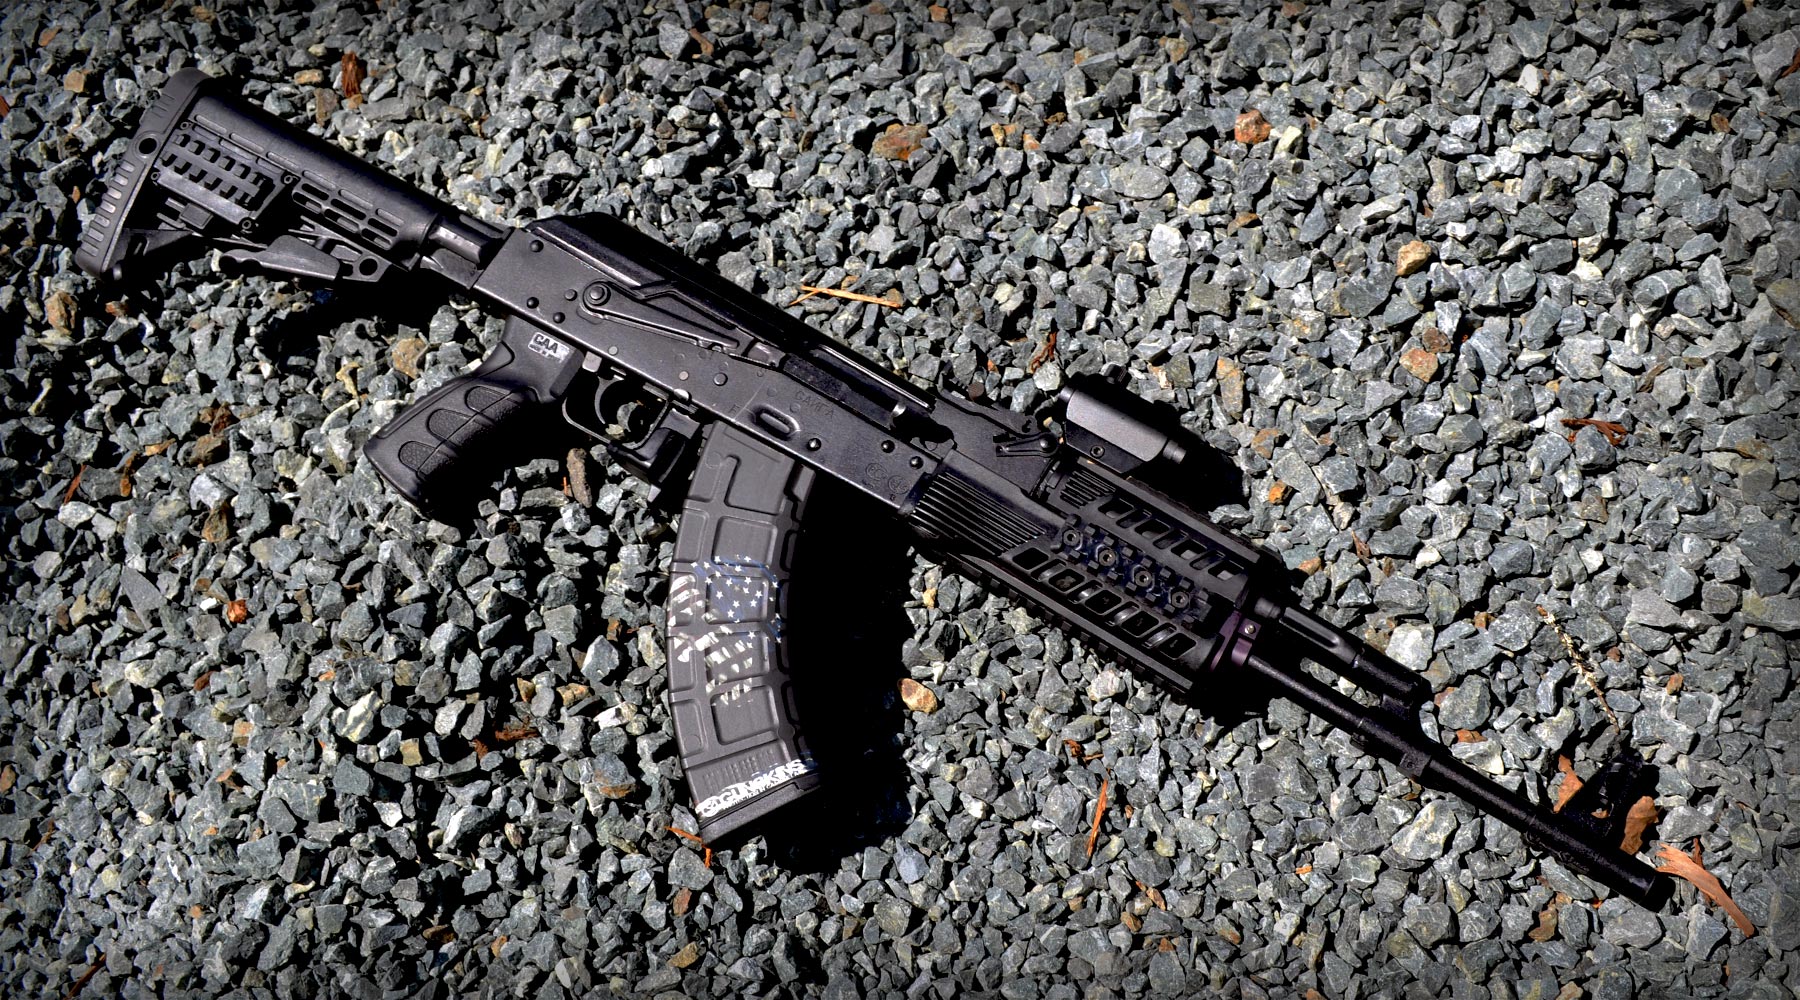 Florida firm pushing sales of its American-made AK-47